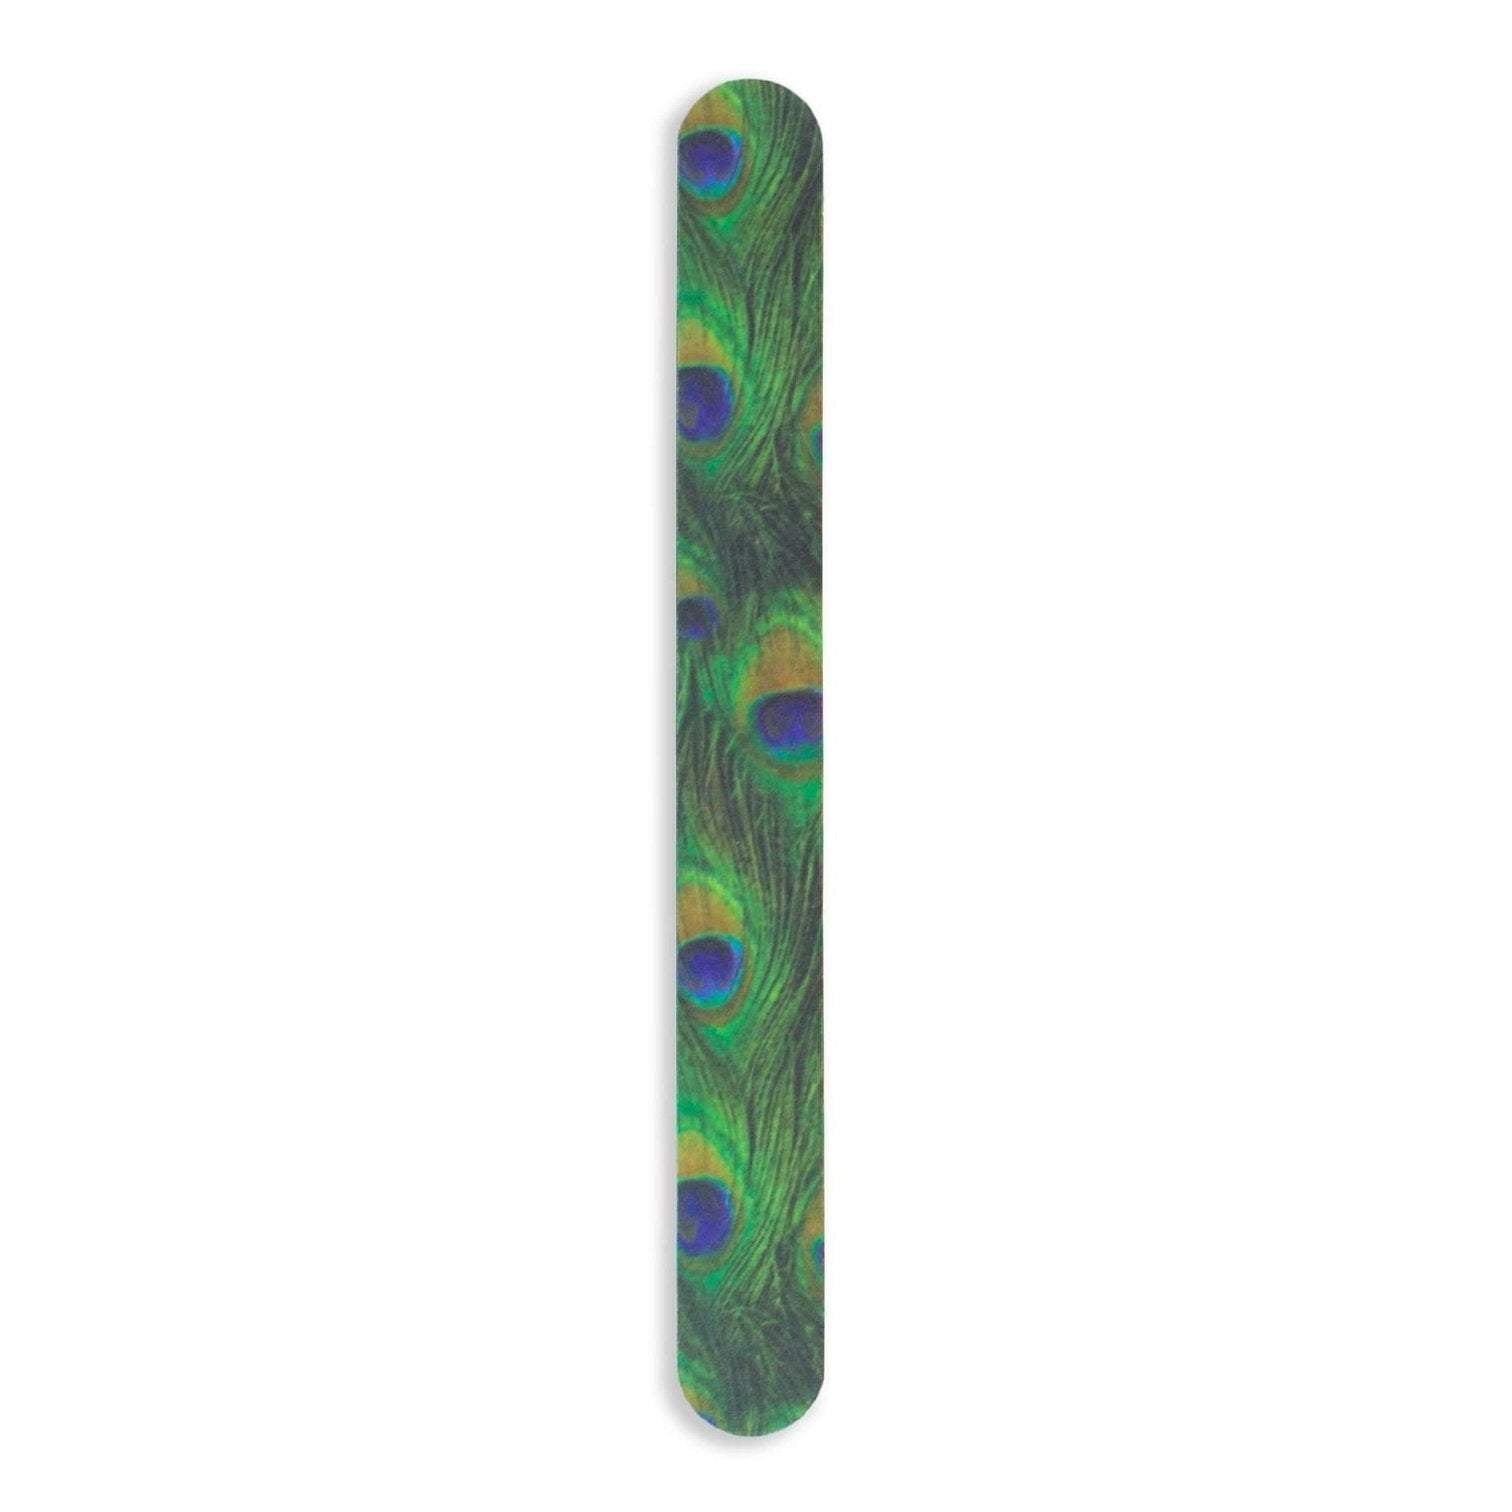 Tropical Shine Nail File Peacock 7 in x 3/4 in Large Size (707572)-Tropical Shine-Brand_Tropical Shine,Collection_Nails,Collection_Summer,Nail_Tools,Pride,Tool_Nails